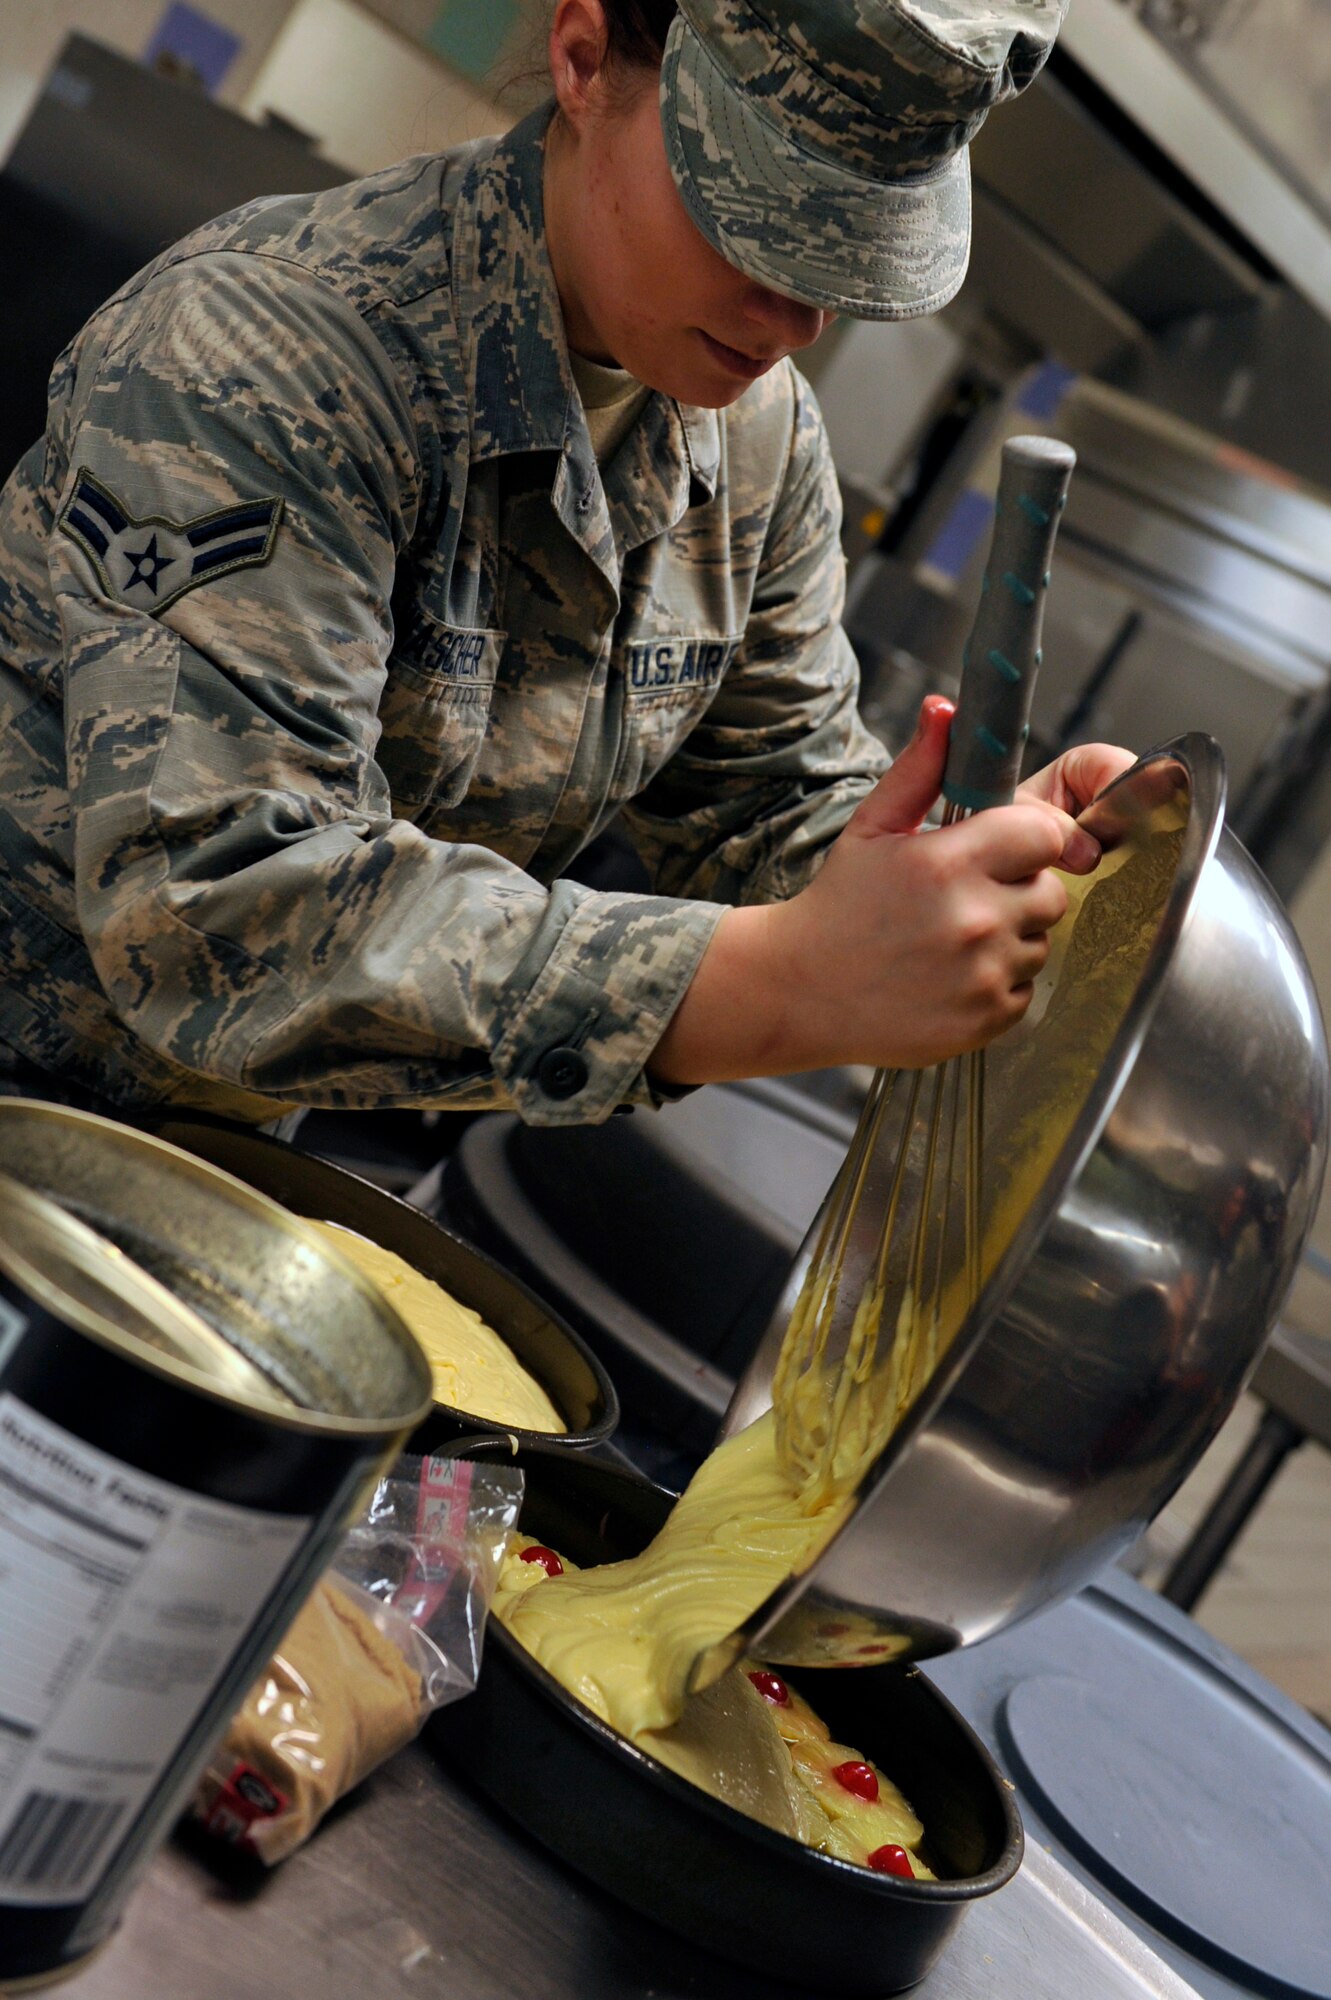 Airman 1st Class Jennifer Wascher, 56th Force Support Squadron food service journeyman, prepares pineapple upside down cake July 13, 2017 at Luke Air Force Base, Ariz. Wascher participated in a two week long Chef Mentor Program to further her culinary skills.  (U.S. Air Force photo by Airman 1st Class Pedro Mota)